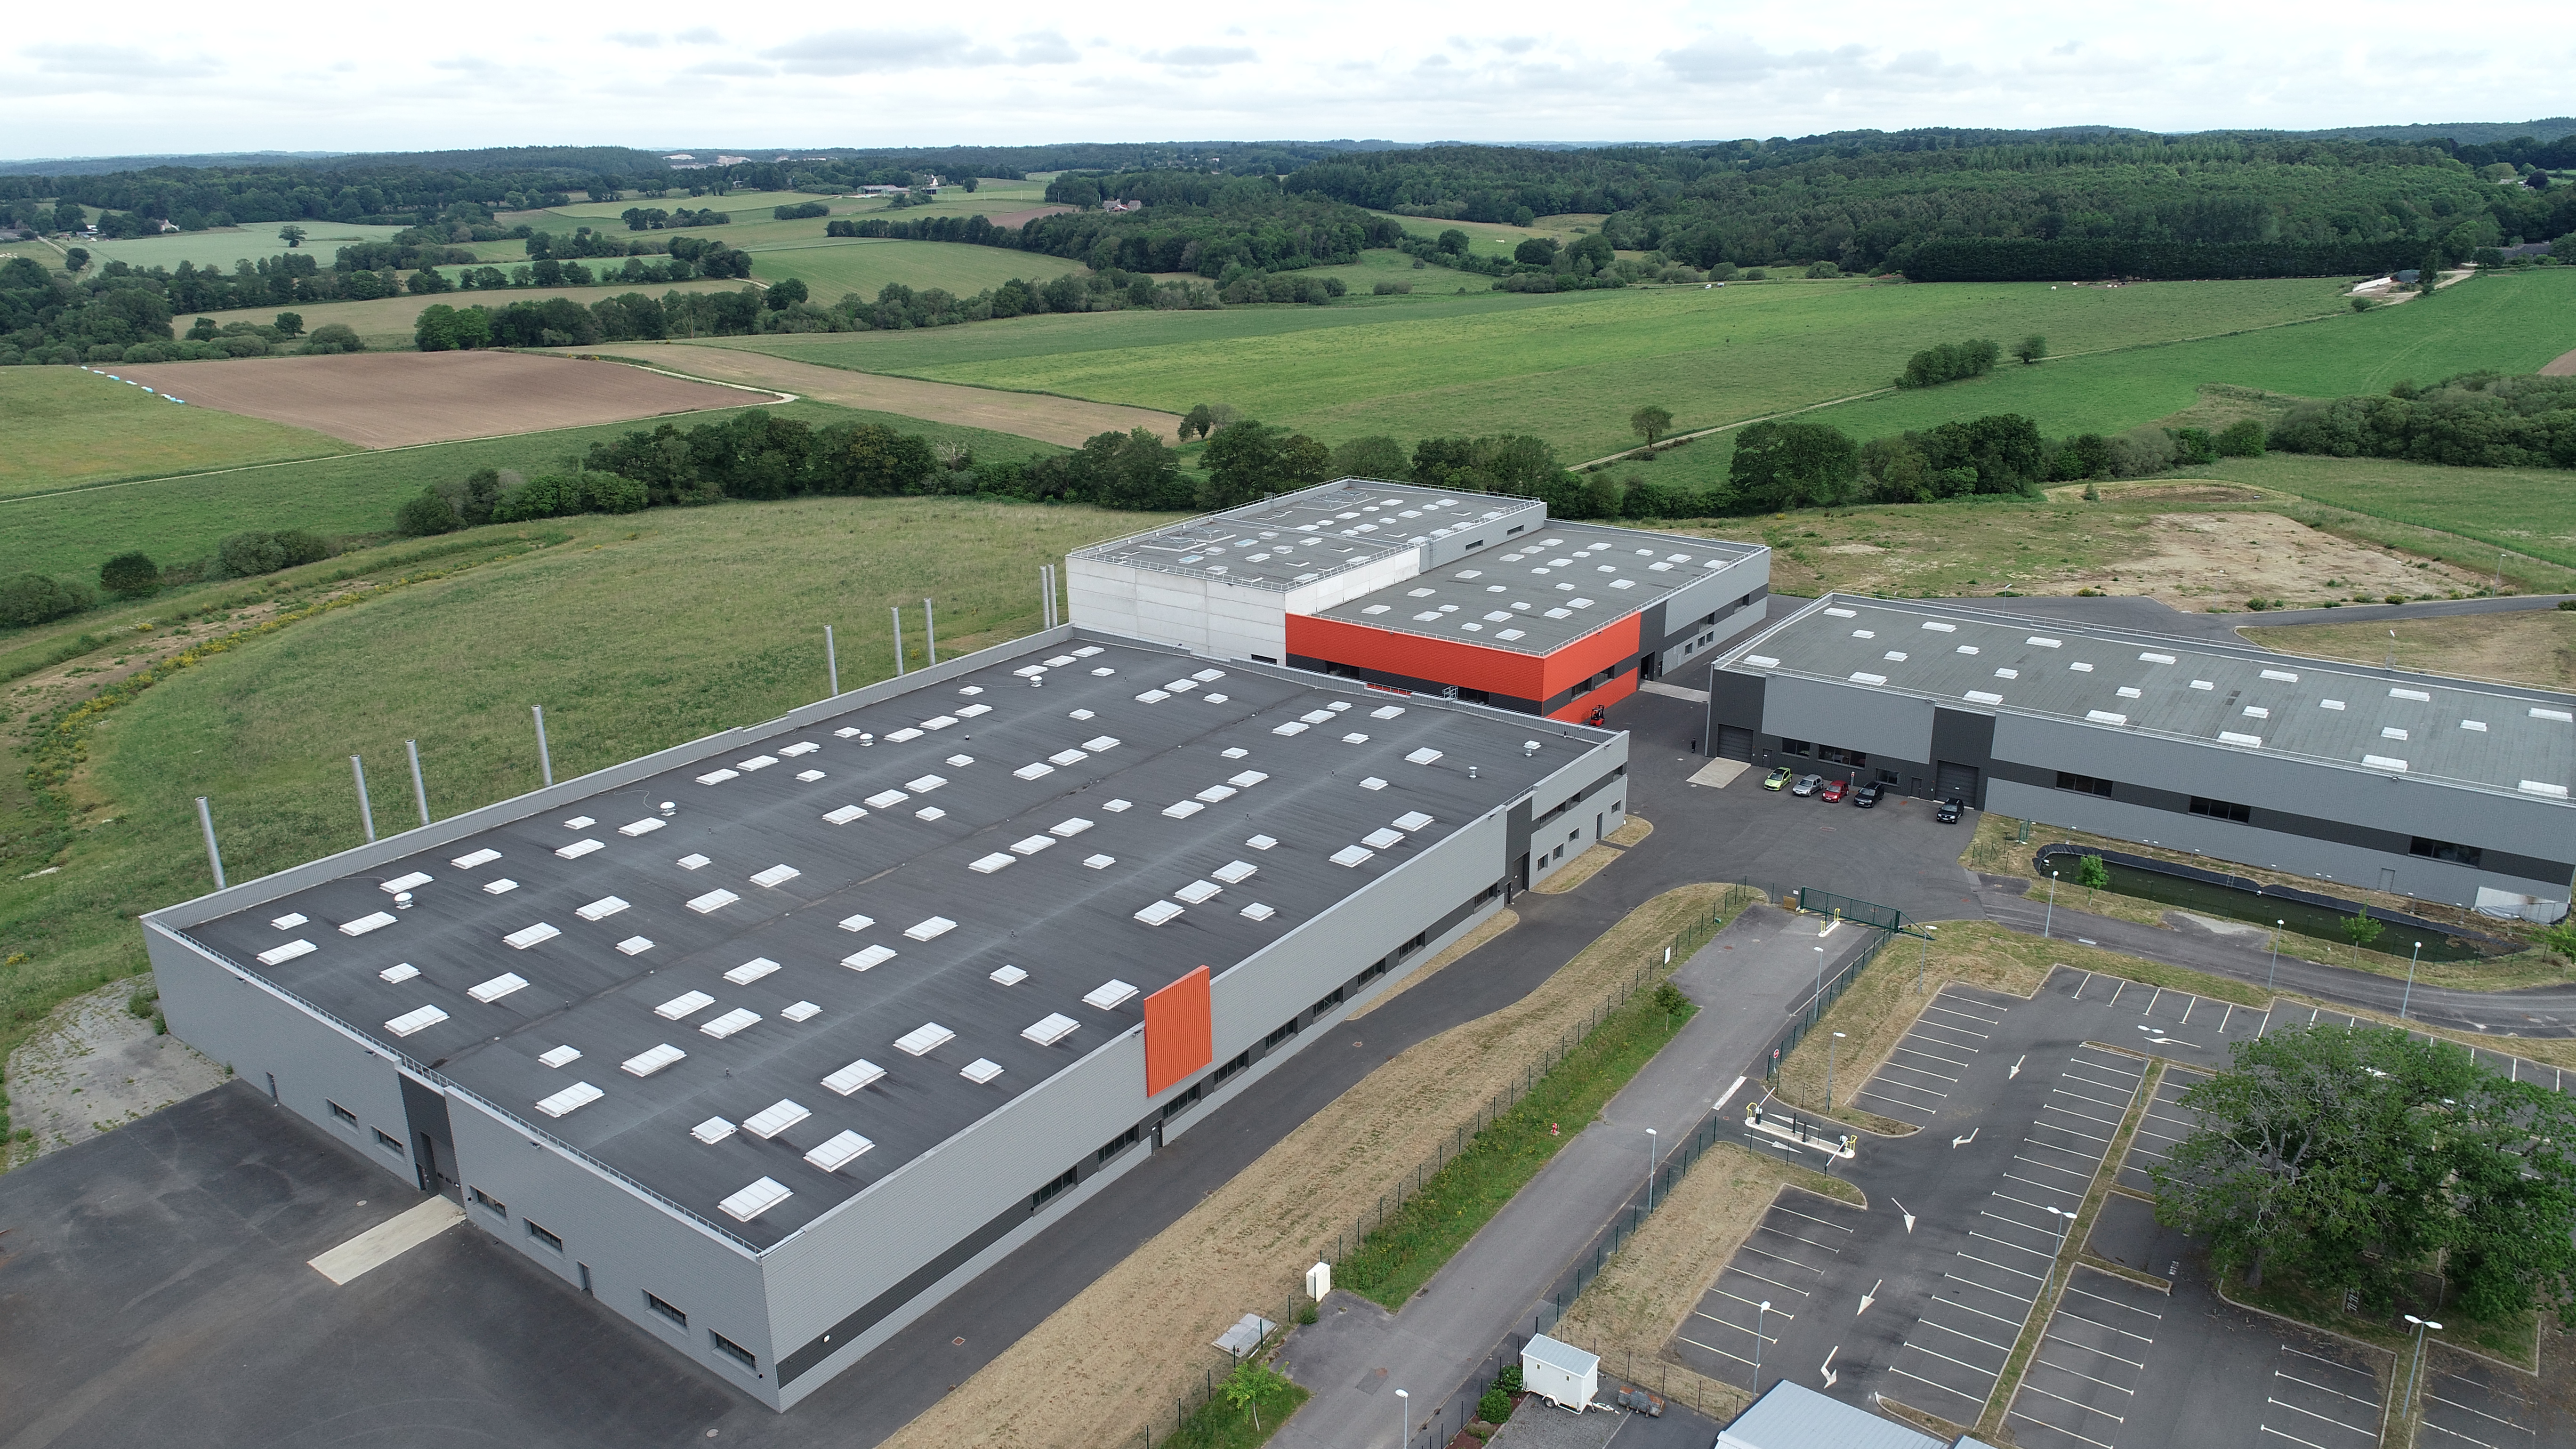 Apply Carbon, a Procotex Corporation company, has expanded its a new carbon fiber facility in Plouay, France.